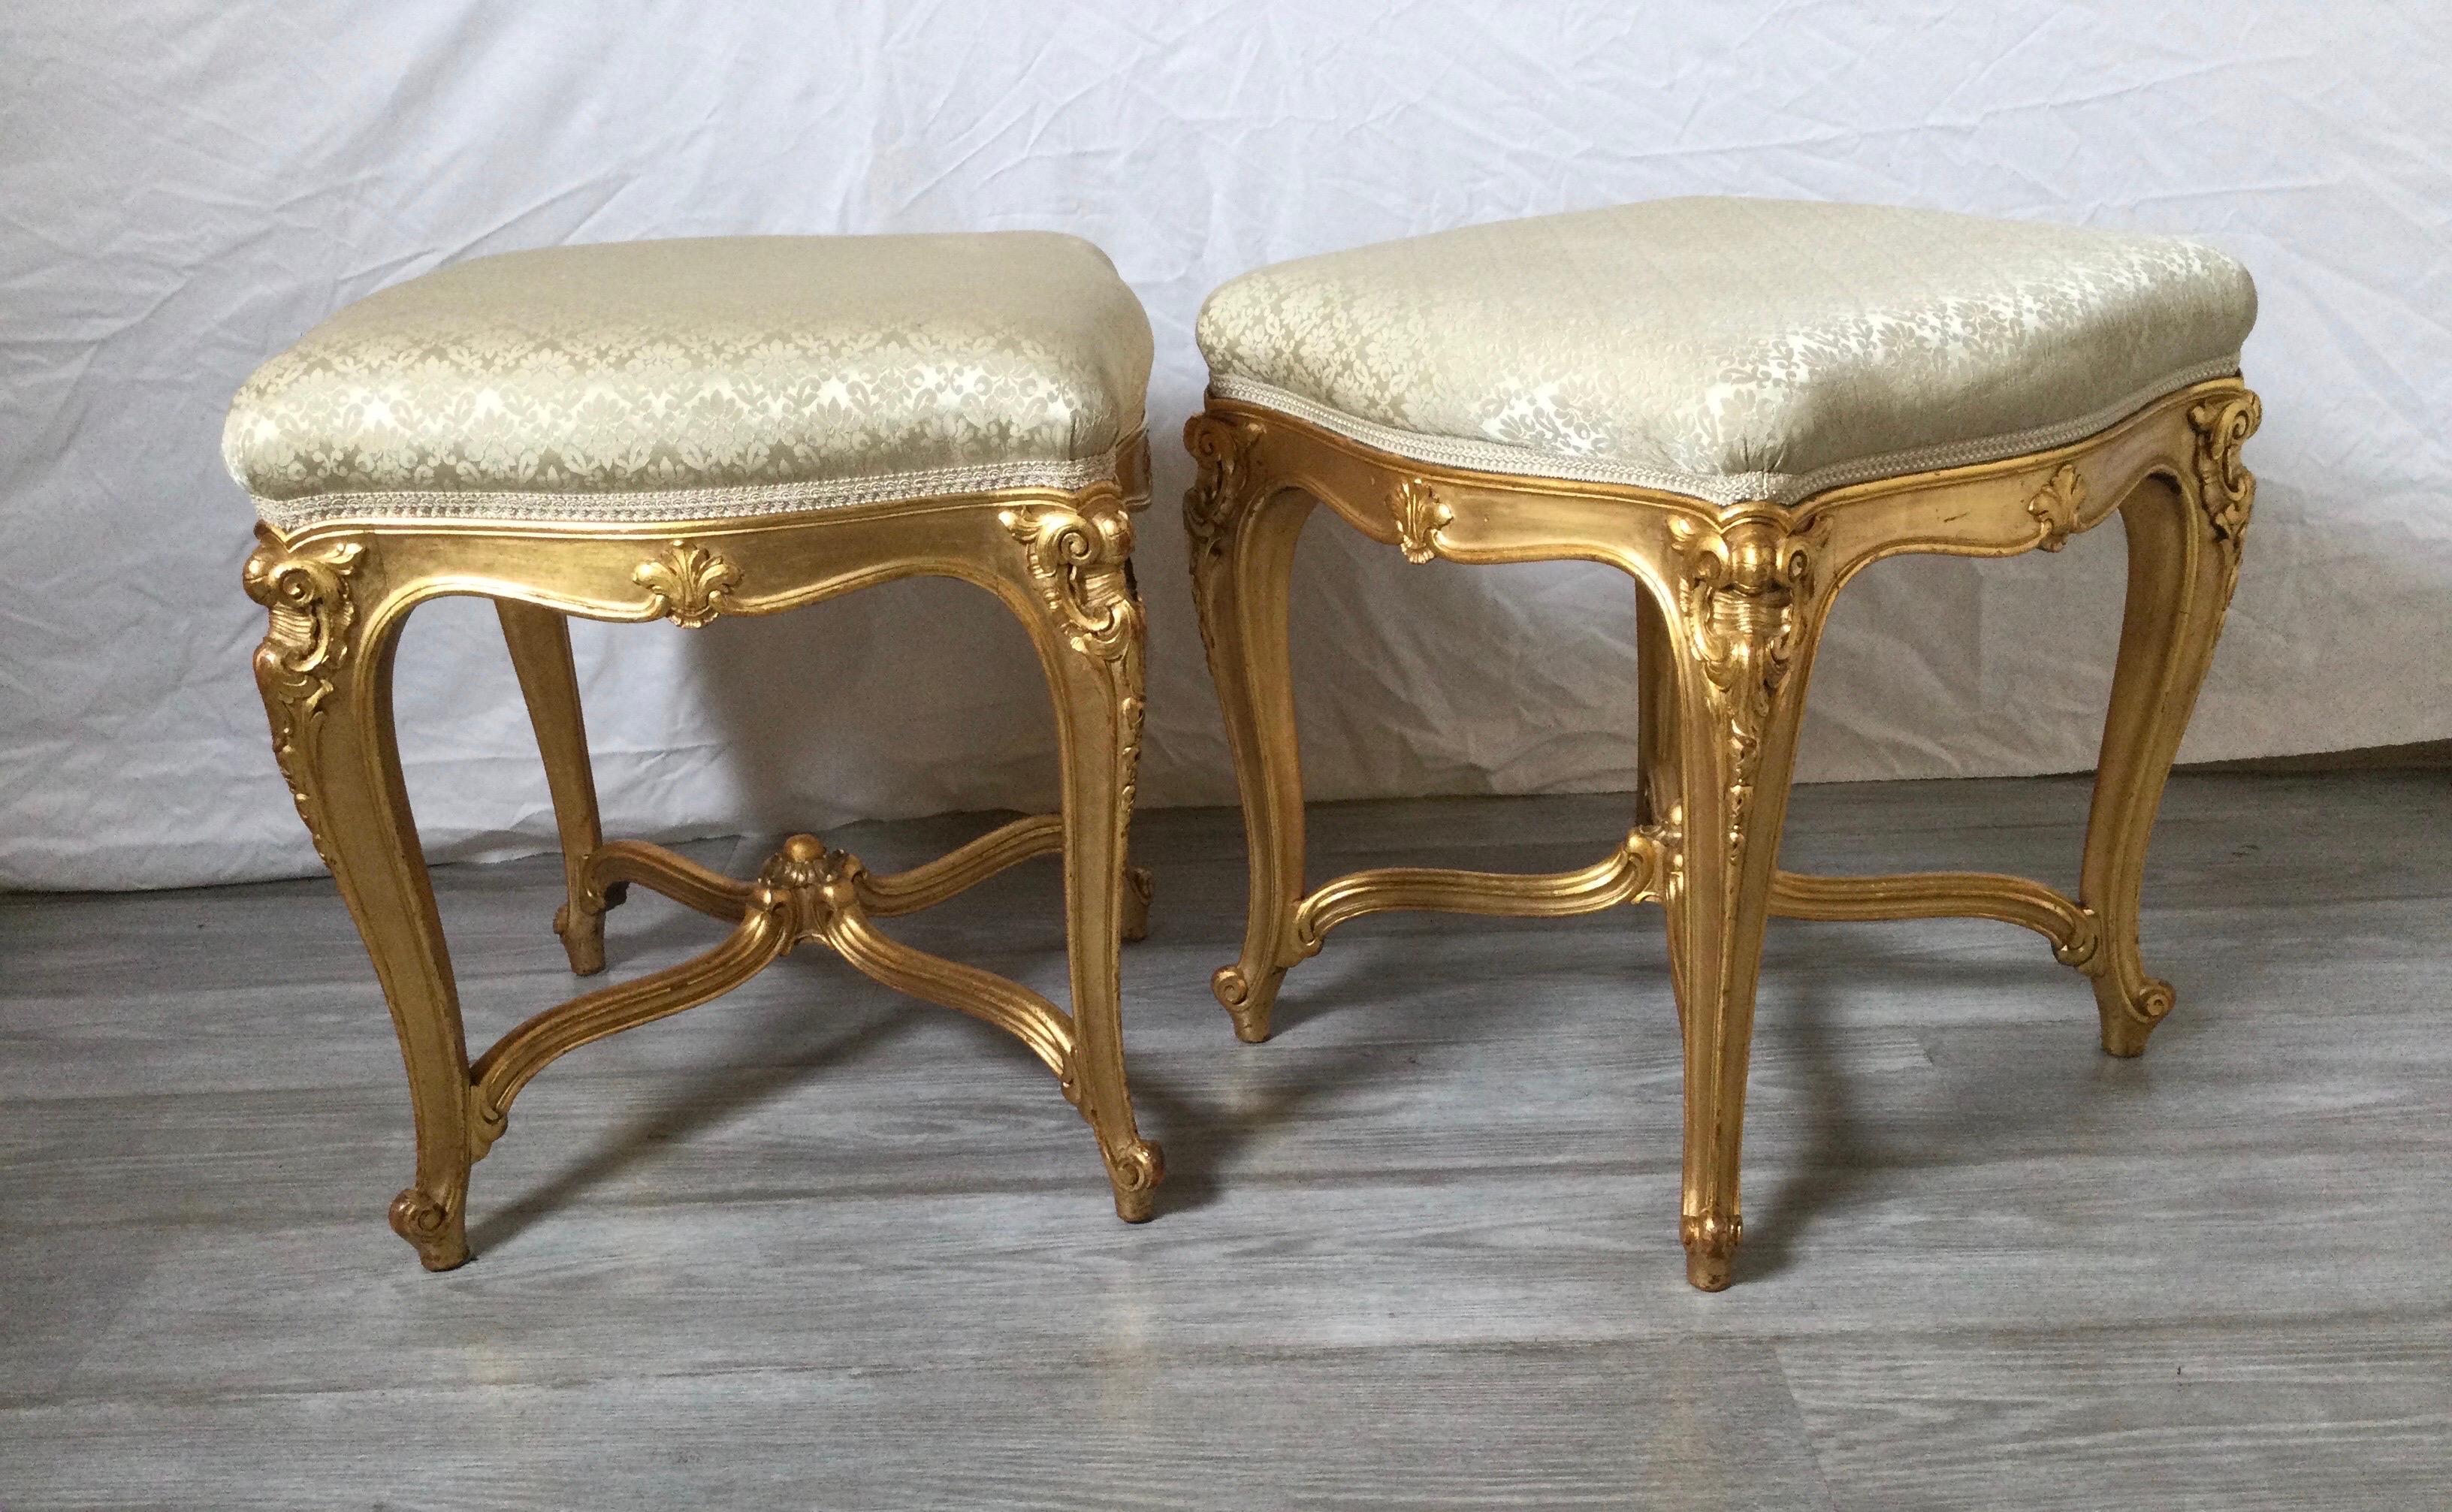 Elegant pair of giltwood Louis XV style benches. The bright gilt surface with cabriole legs with an X stretcher base. The seats in a celery green woven silk.